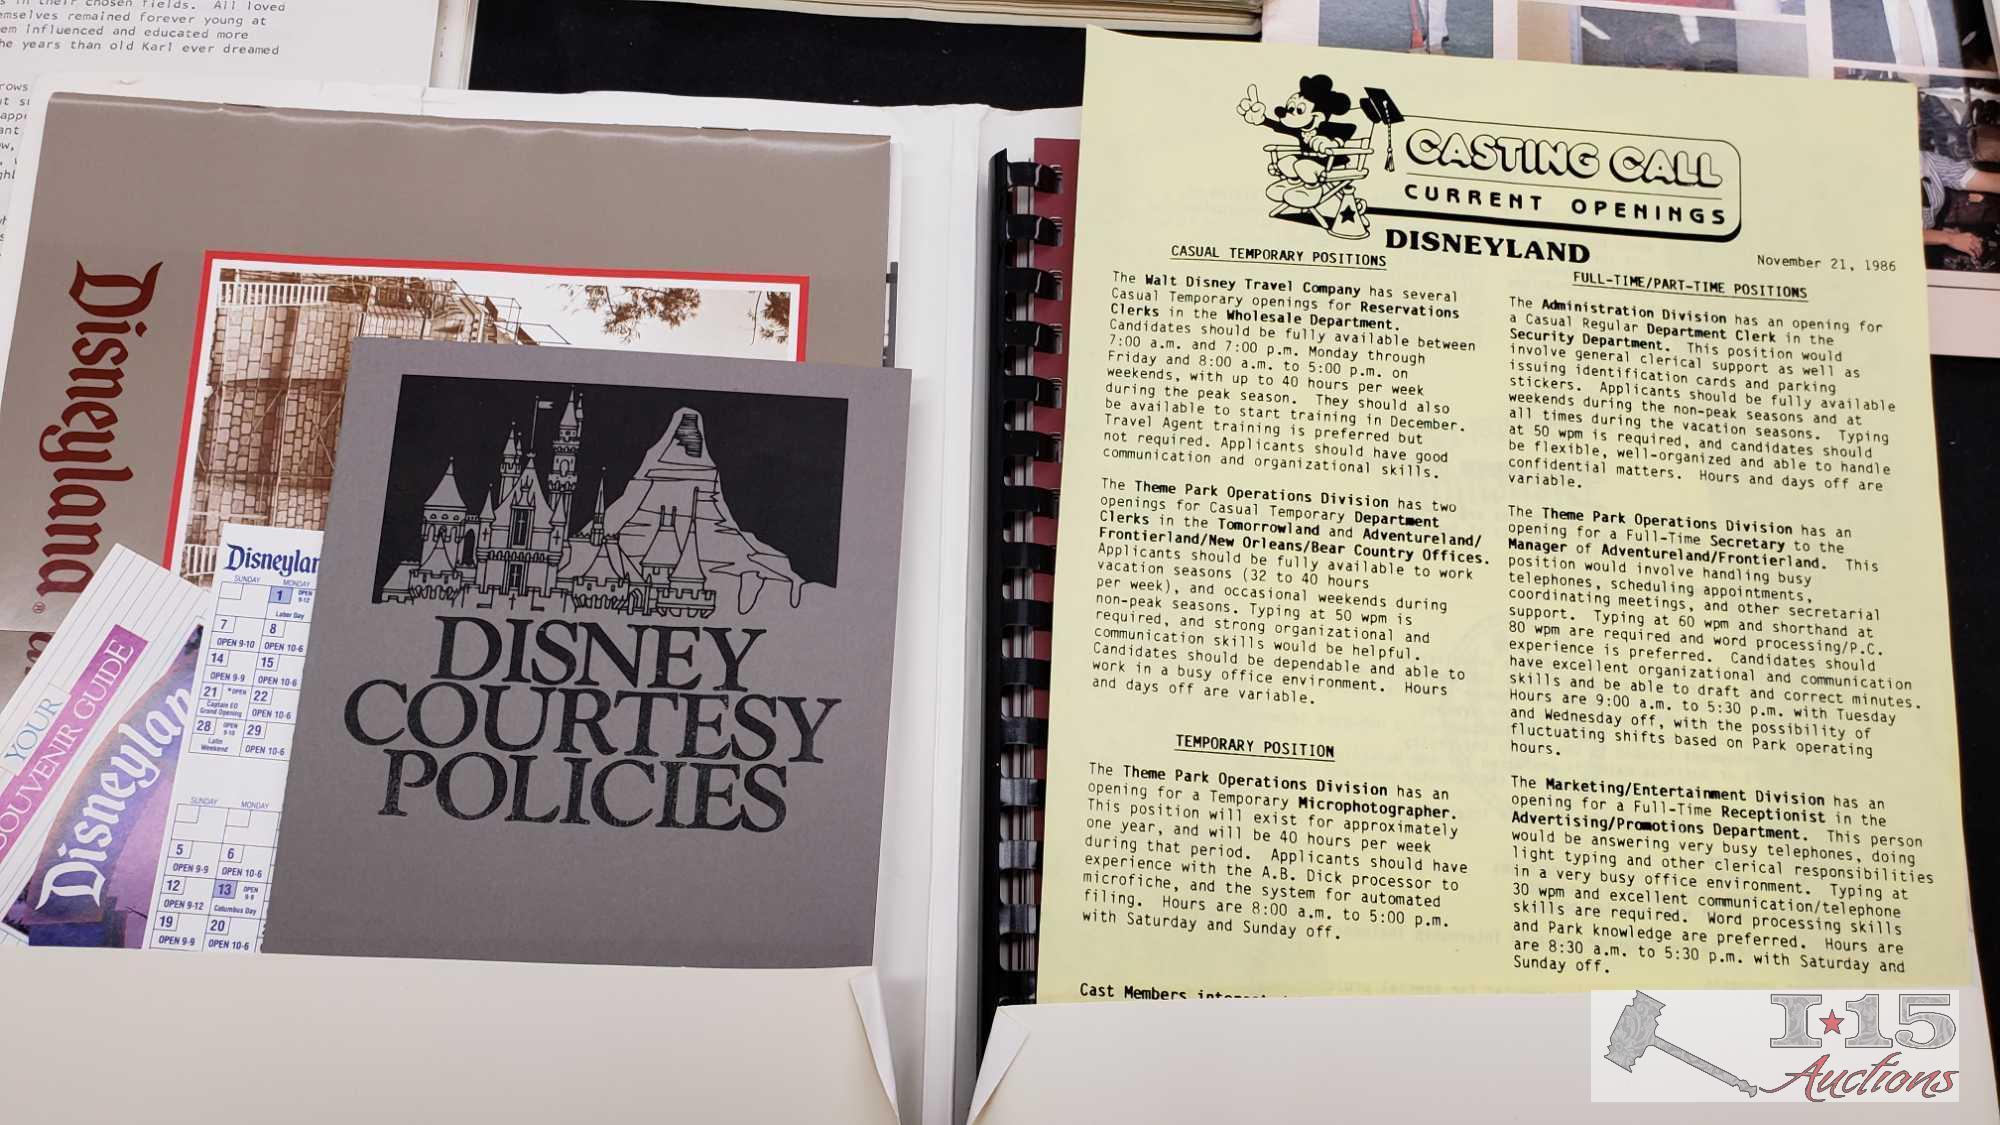 Disney Employee Manuals, Lead Training Information, Saftey Manual and others